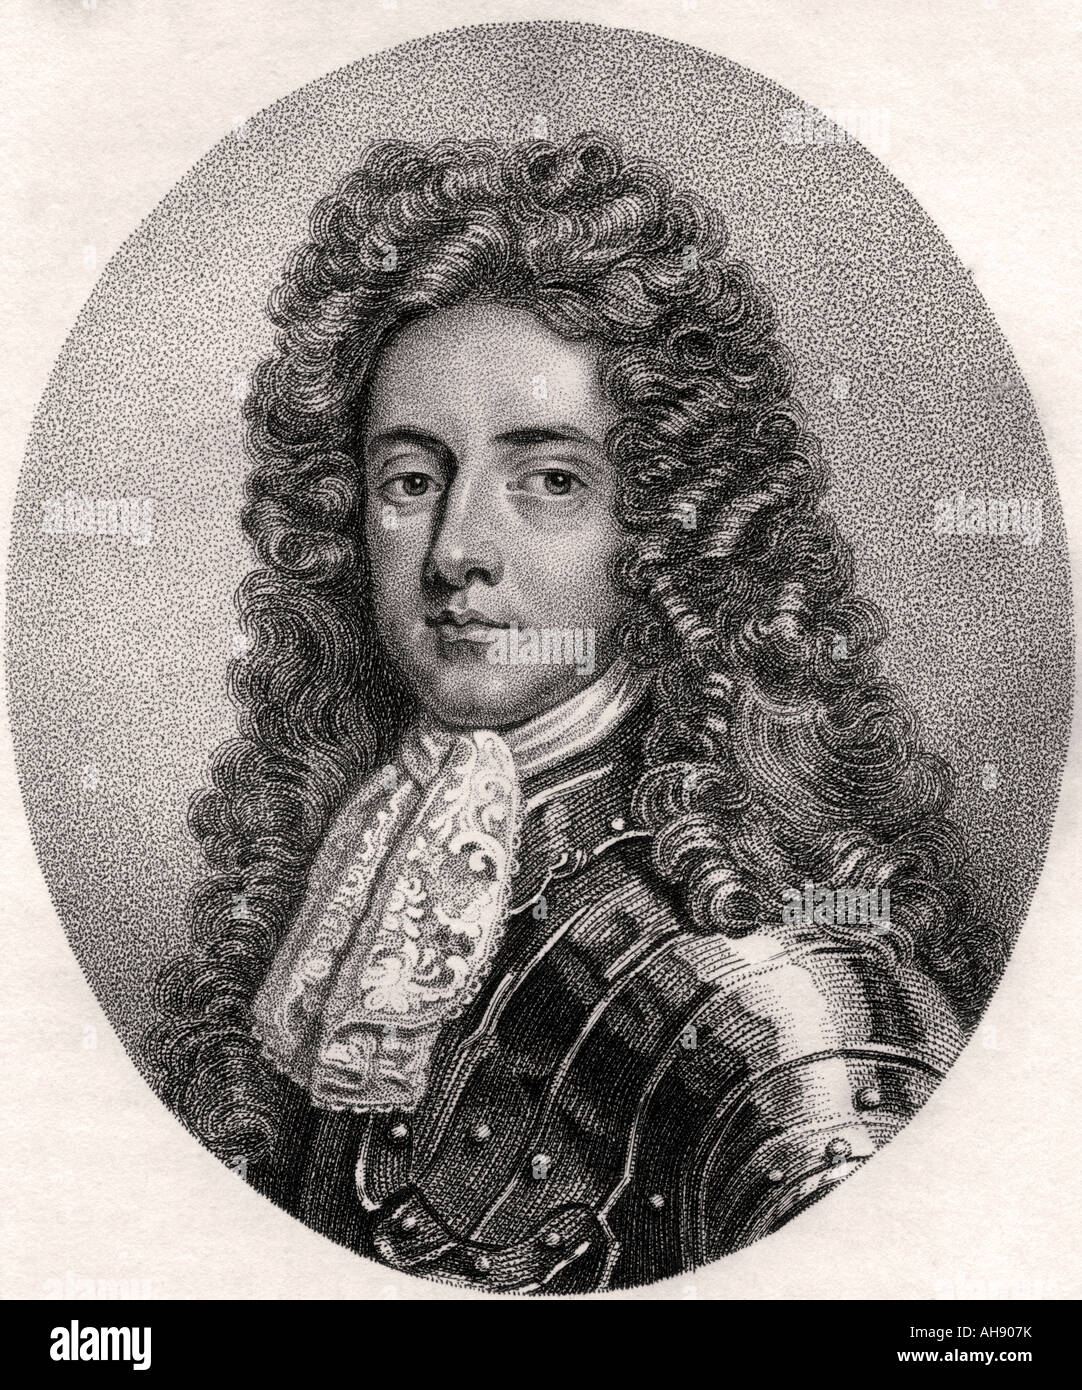 Henry Booth,1st Earl of Warrington, Lord Delamer, 1651 - 1694. English politician, Mayor of Chester and author. Stock Photo